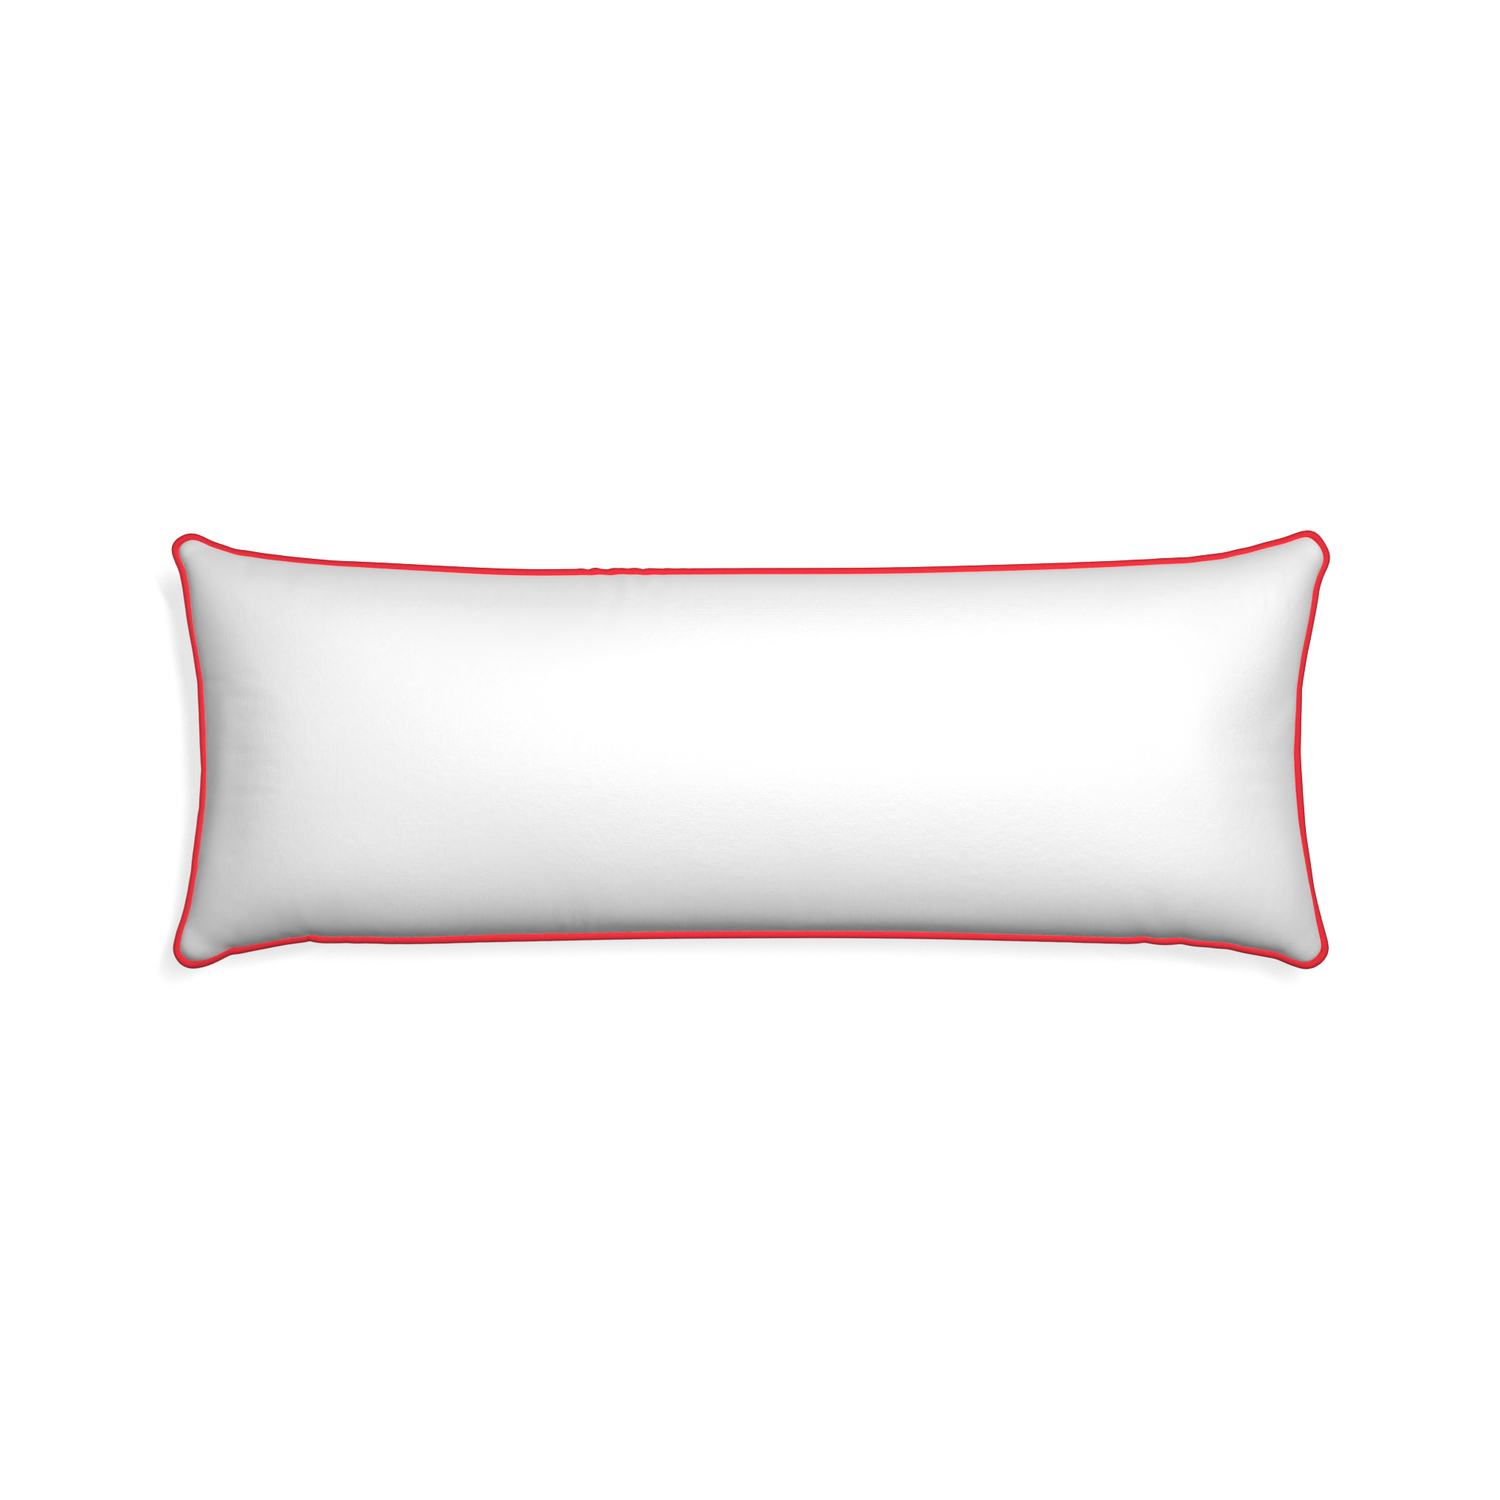 Xl-lumbar snow custom white cottonpillow with cherry piping on white background